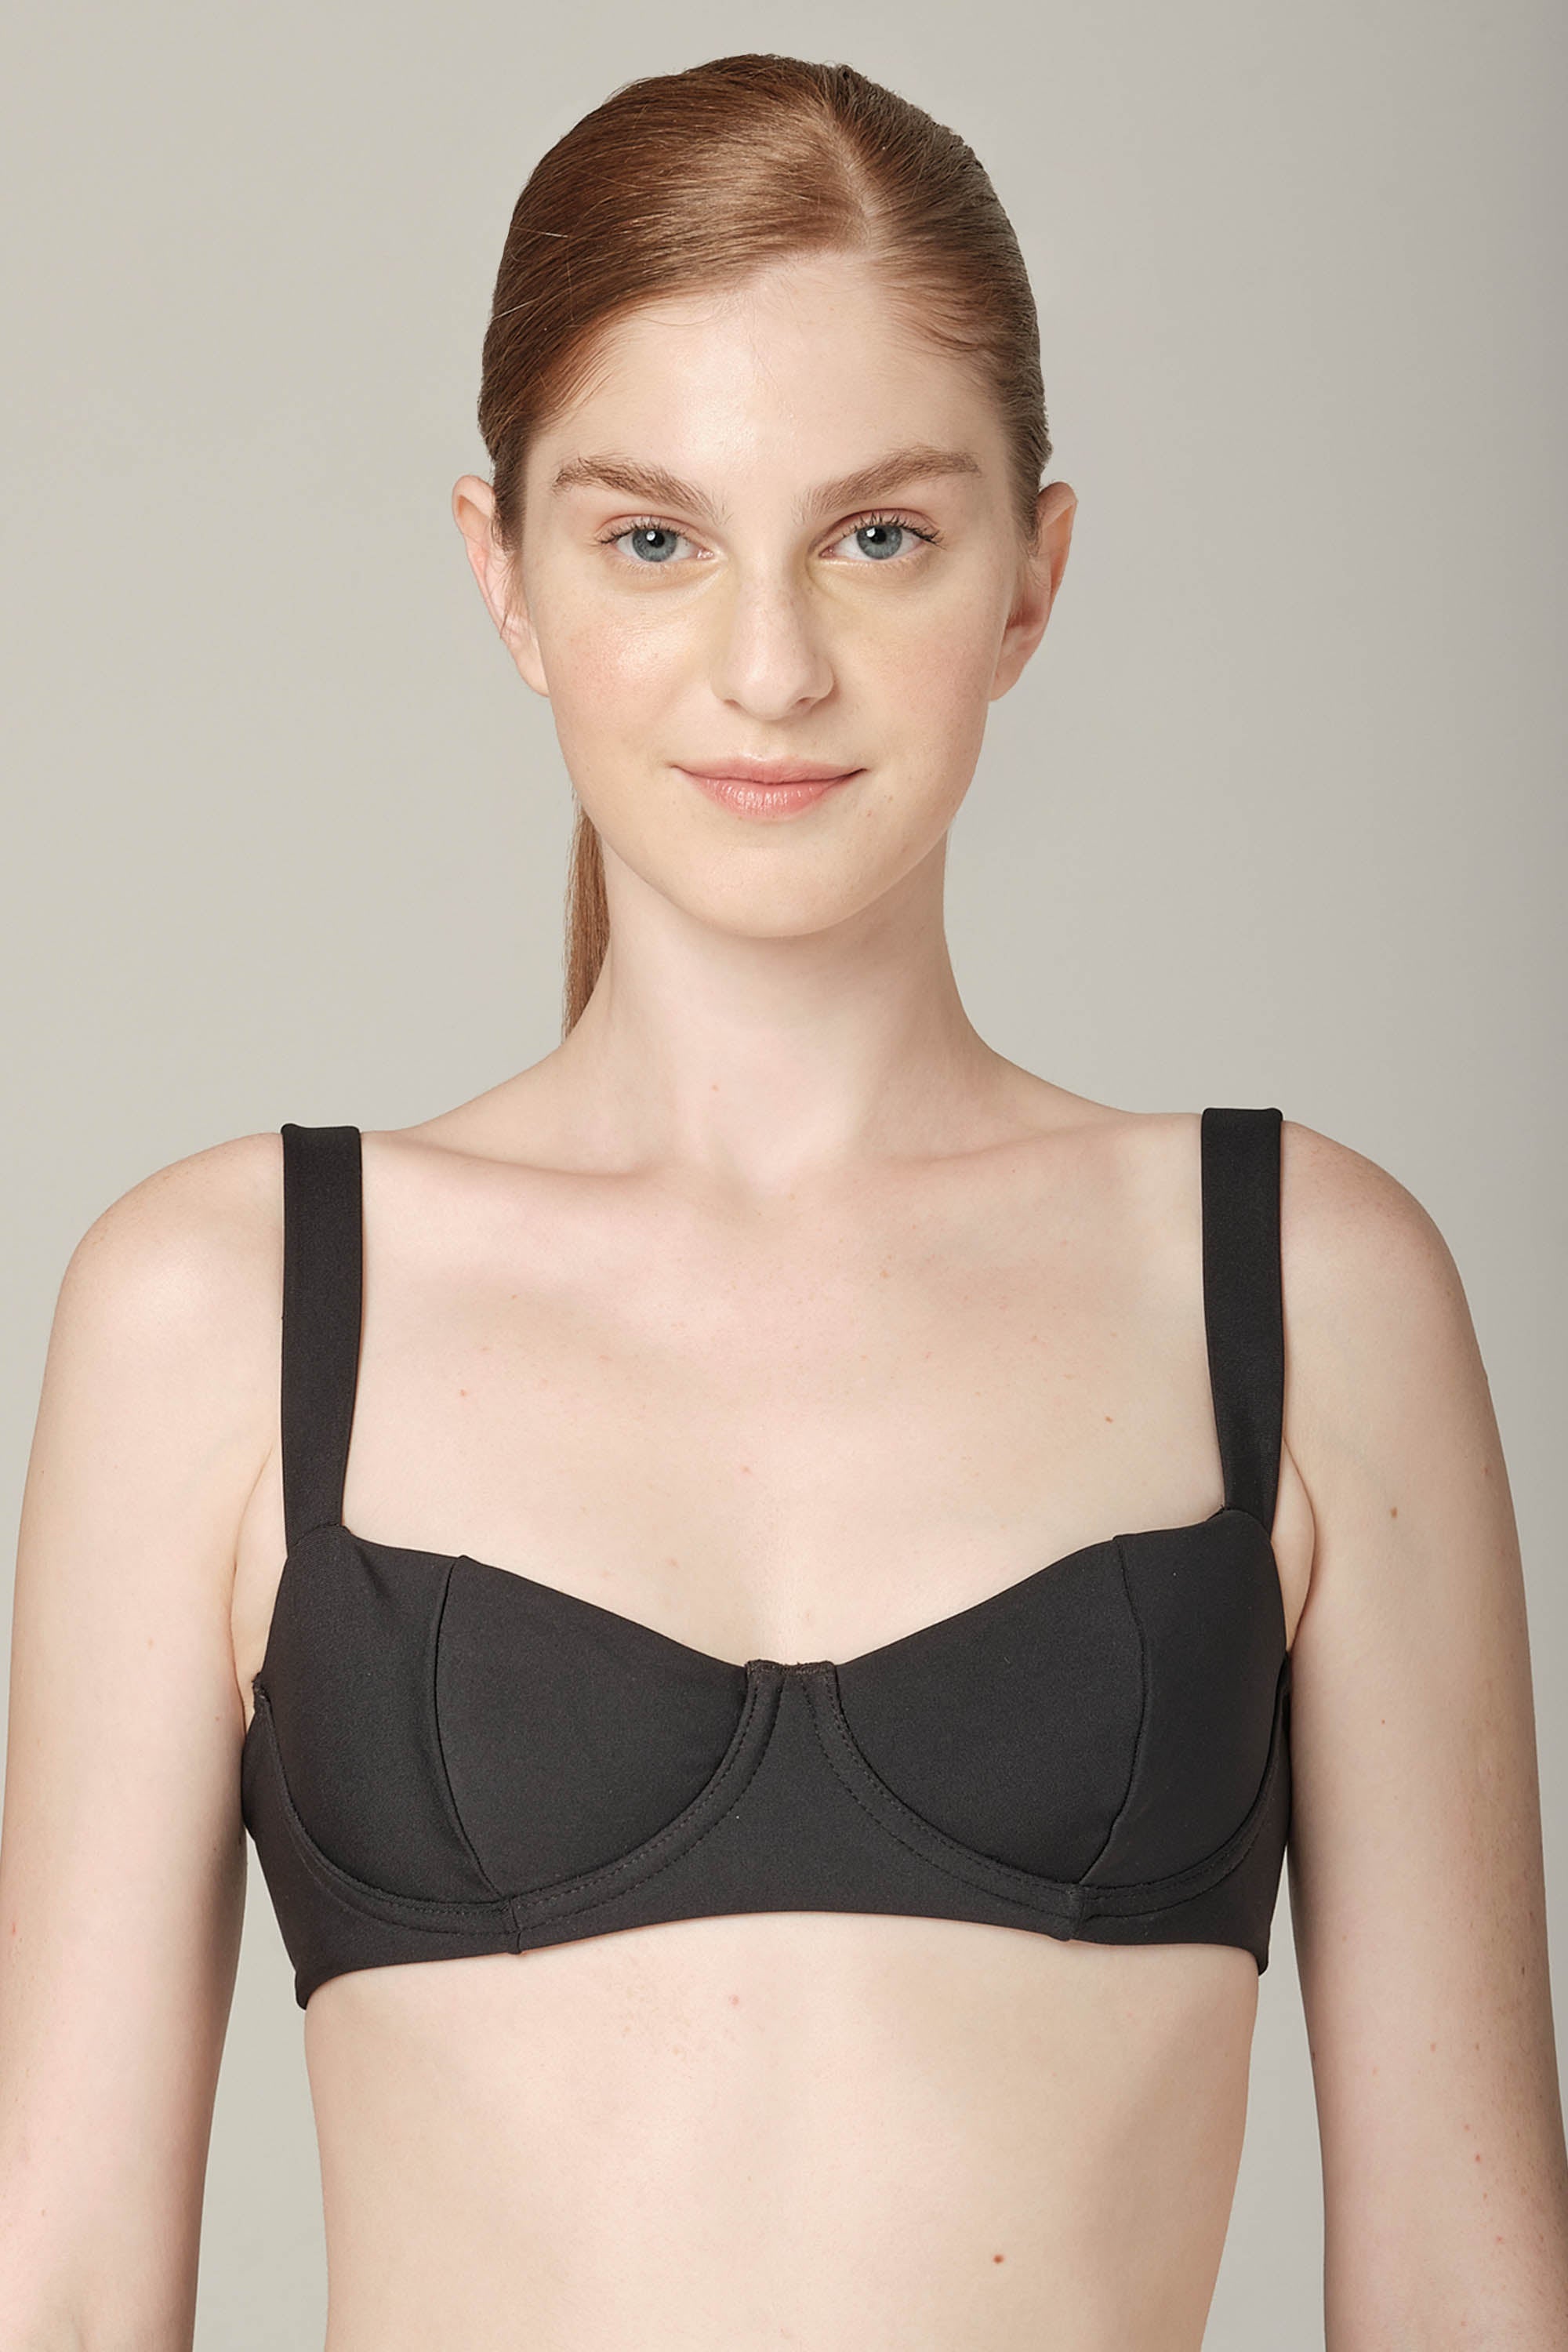 925fit - No Strings Attached Black Bra – 9two5fit